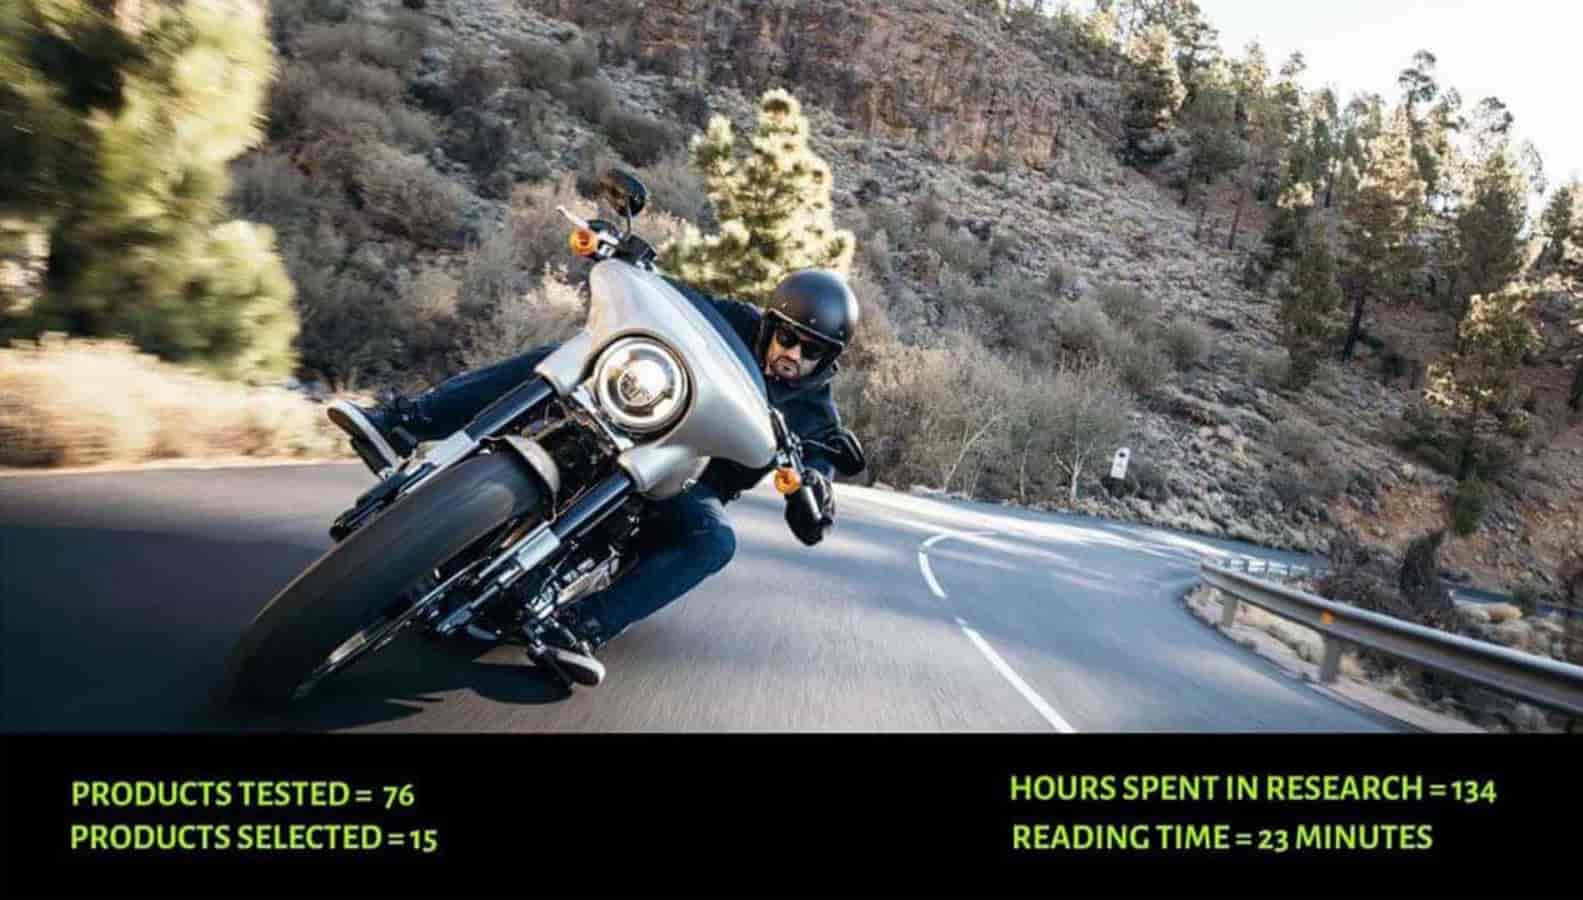 Best Tyre For Bike in India in 2022 Reviews